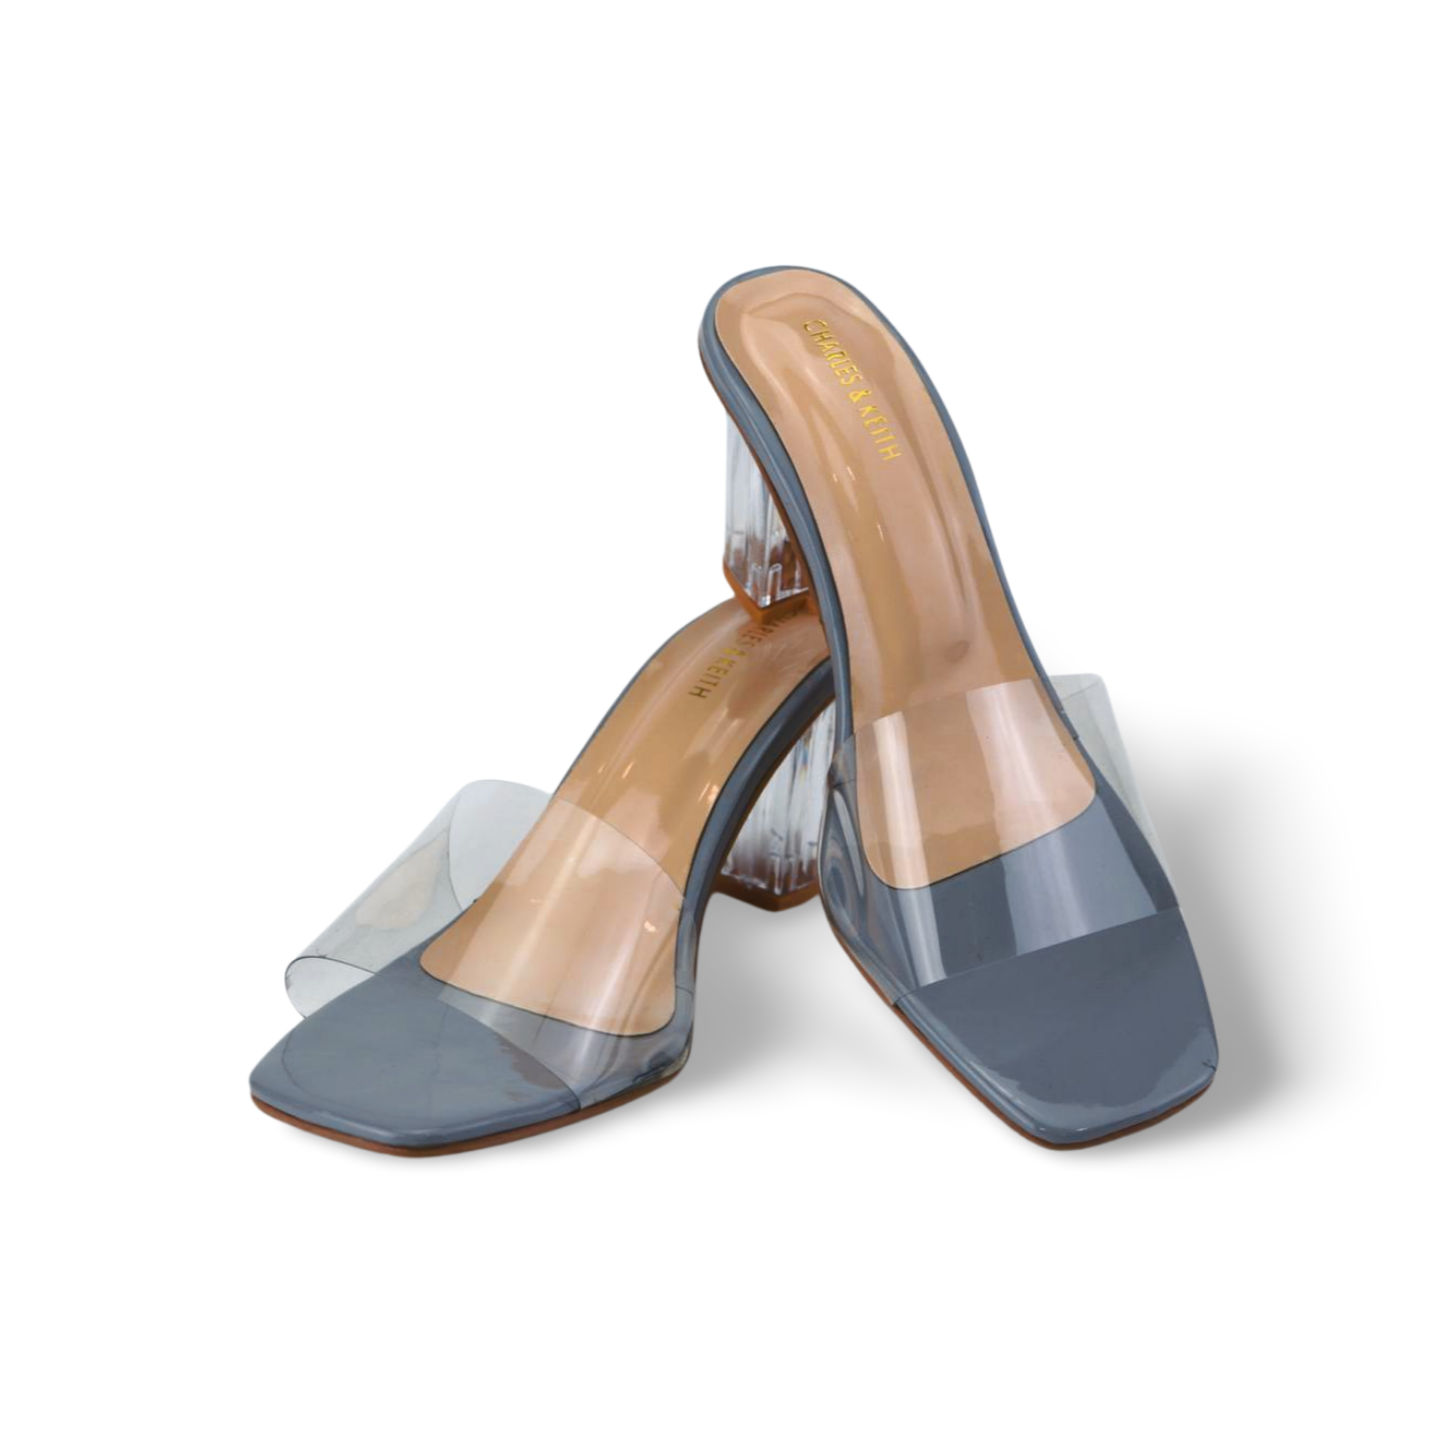 Stylish Clear Mules with Clear Heels: Stylish and Comfortable for Any Occasion